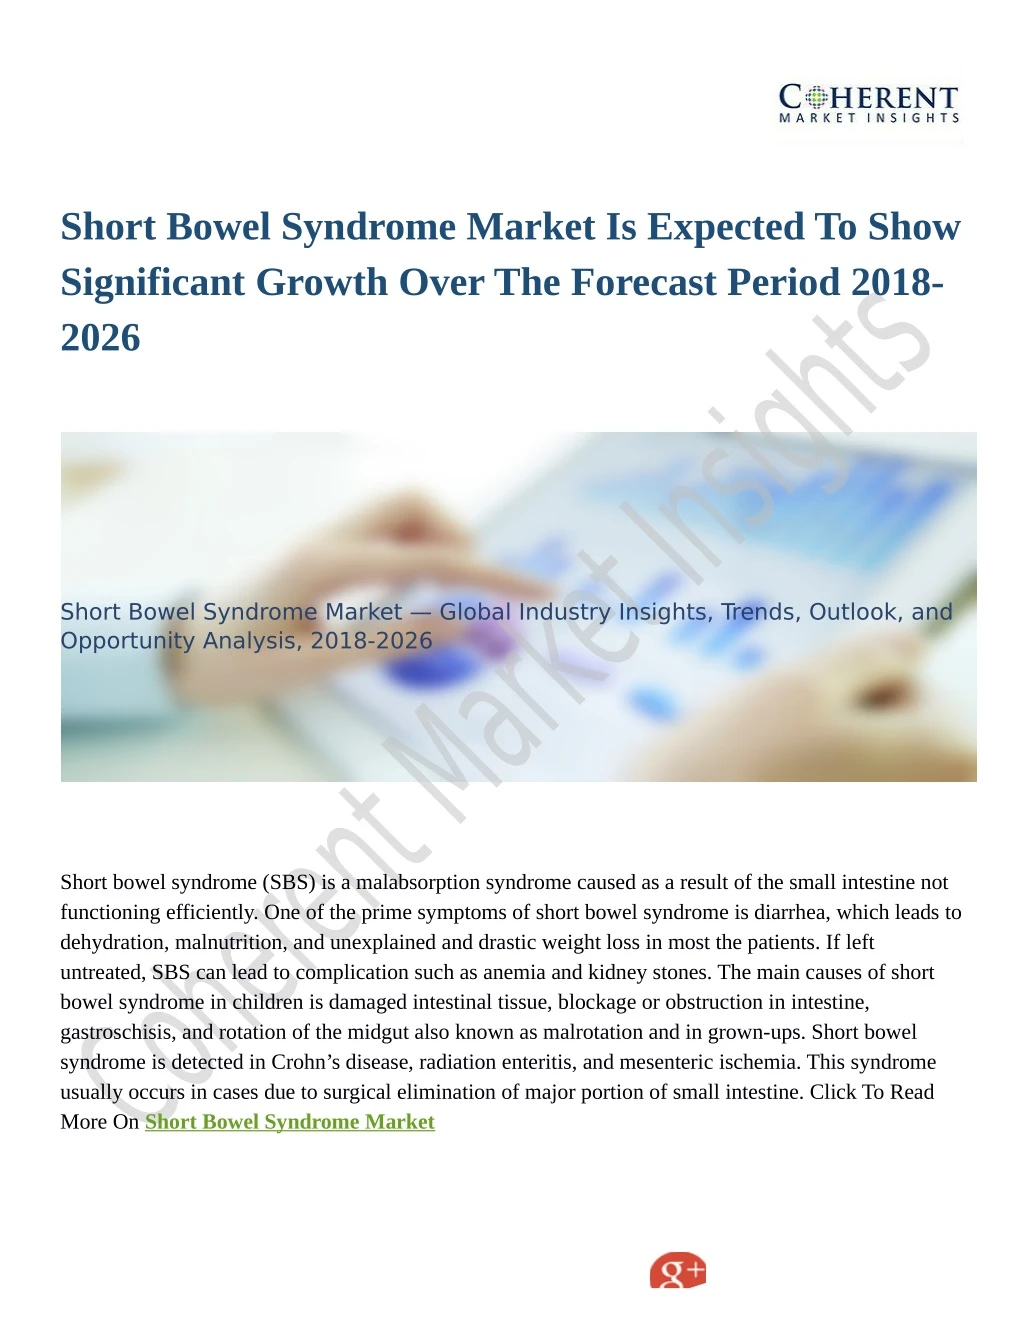 short bowel syndrome market is expected to show